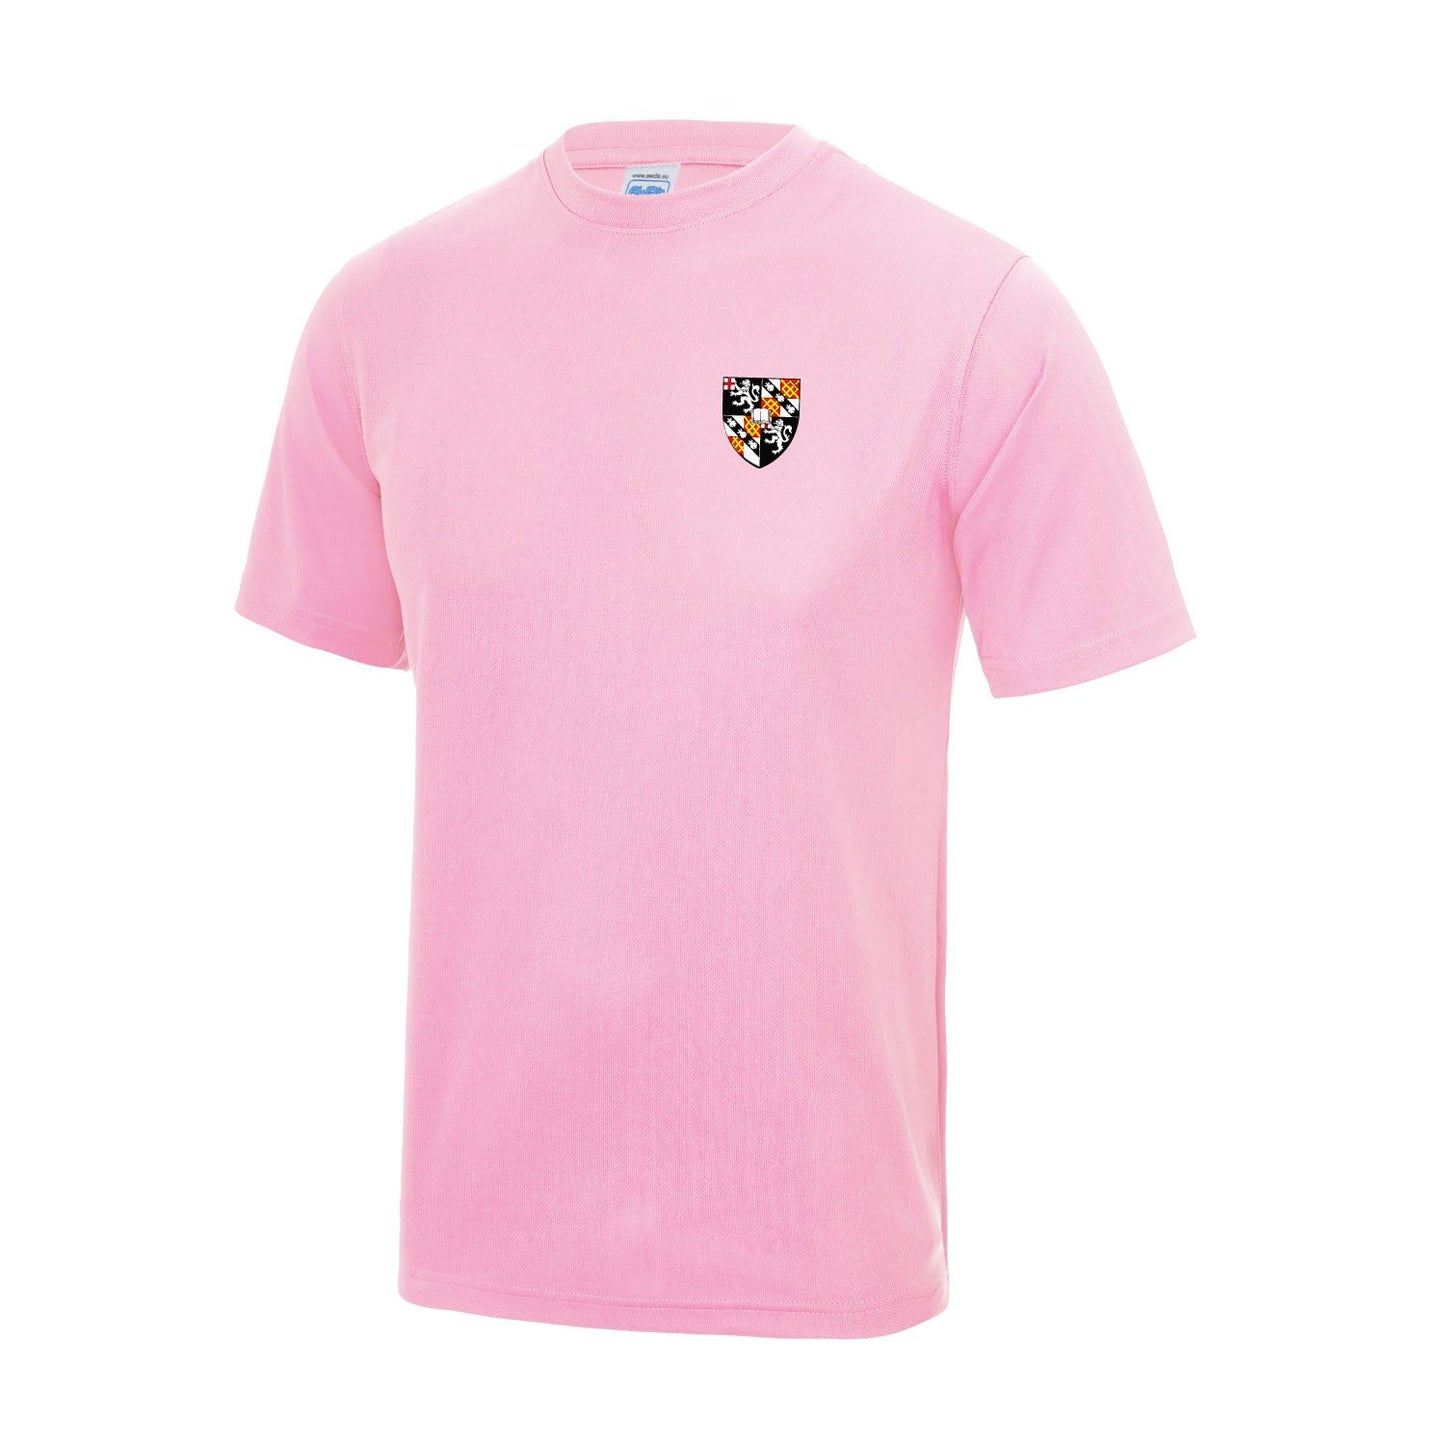 churchill college cambridge rugby tshirt pink front